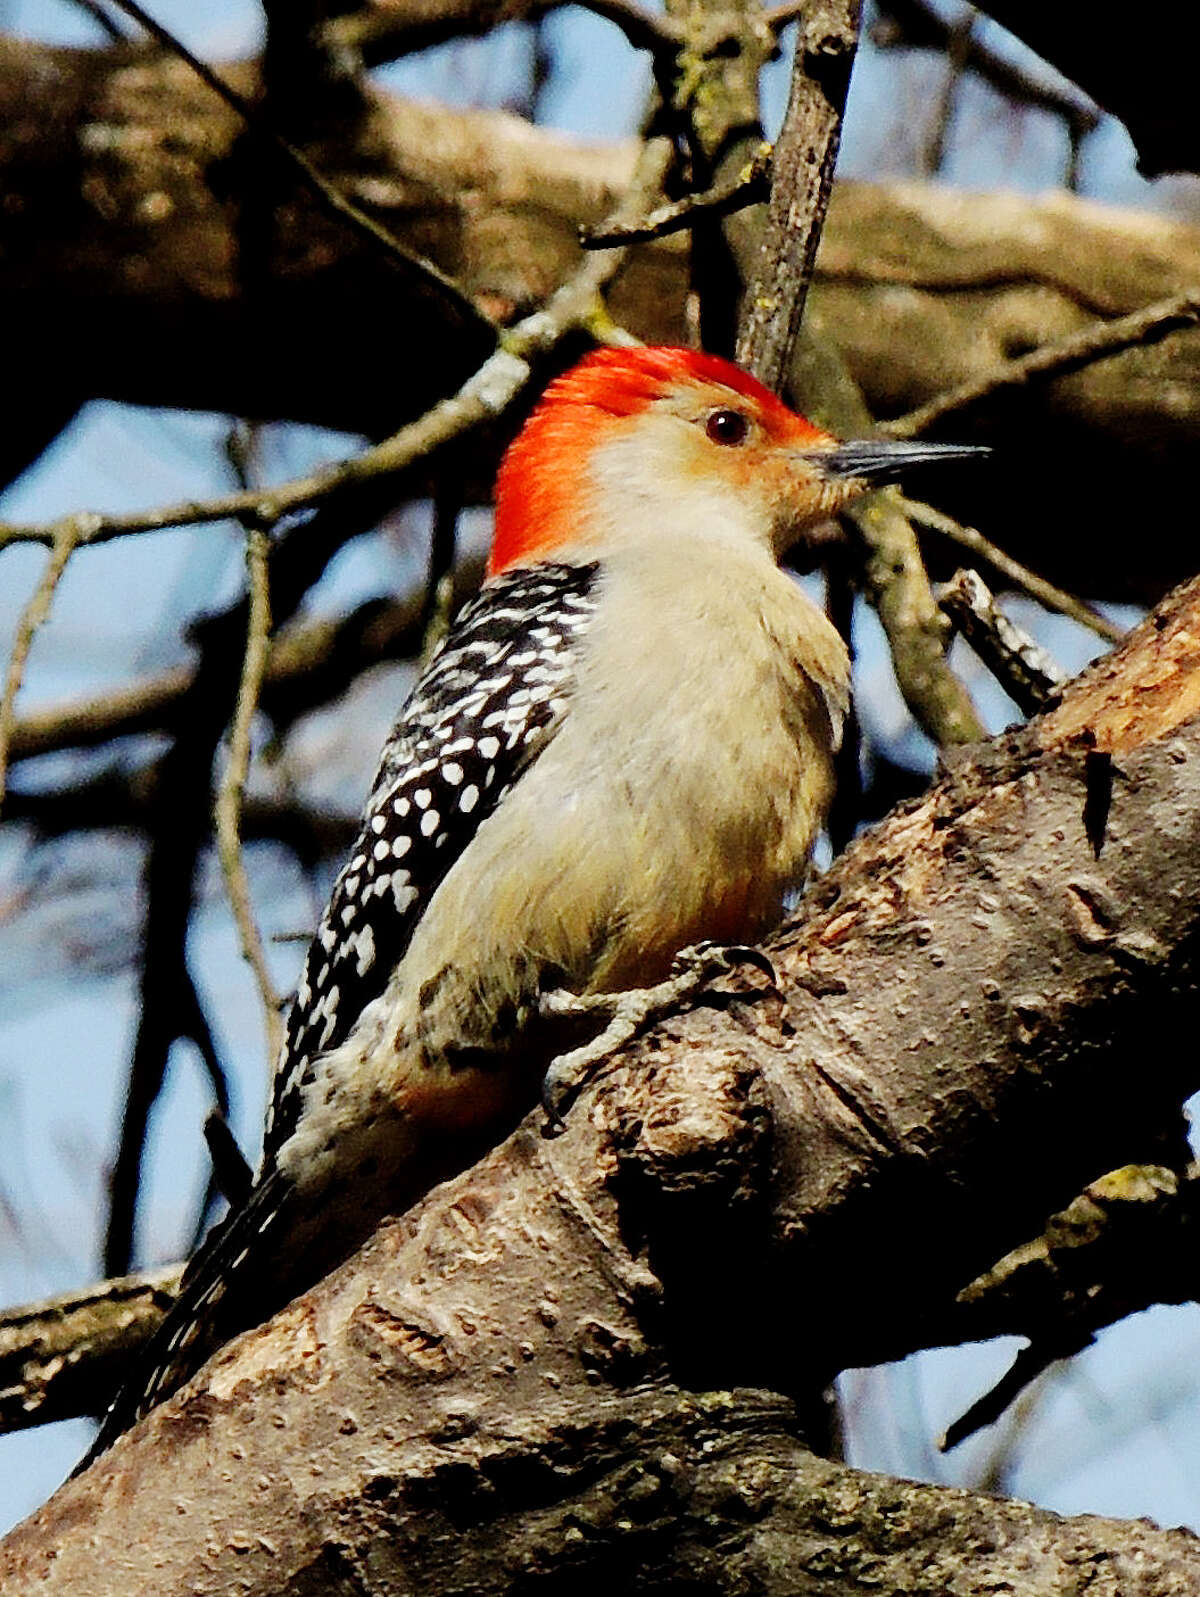 The red-bellied woodpecker is sometimes confused with the red-headed woodpecker because both birds have a red head. The red-bellied woodpecker has more of an orange-red head, and the belly may or may not have a red spot. Woodpeckers of this species in the south are more likely to have a red spot on the belly.